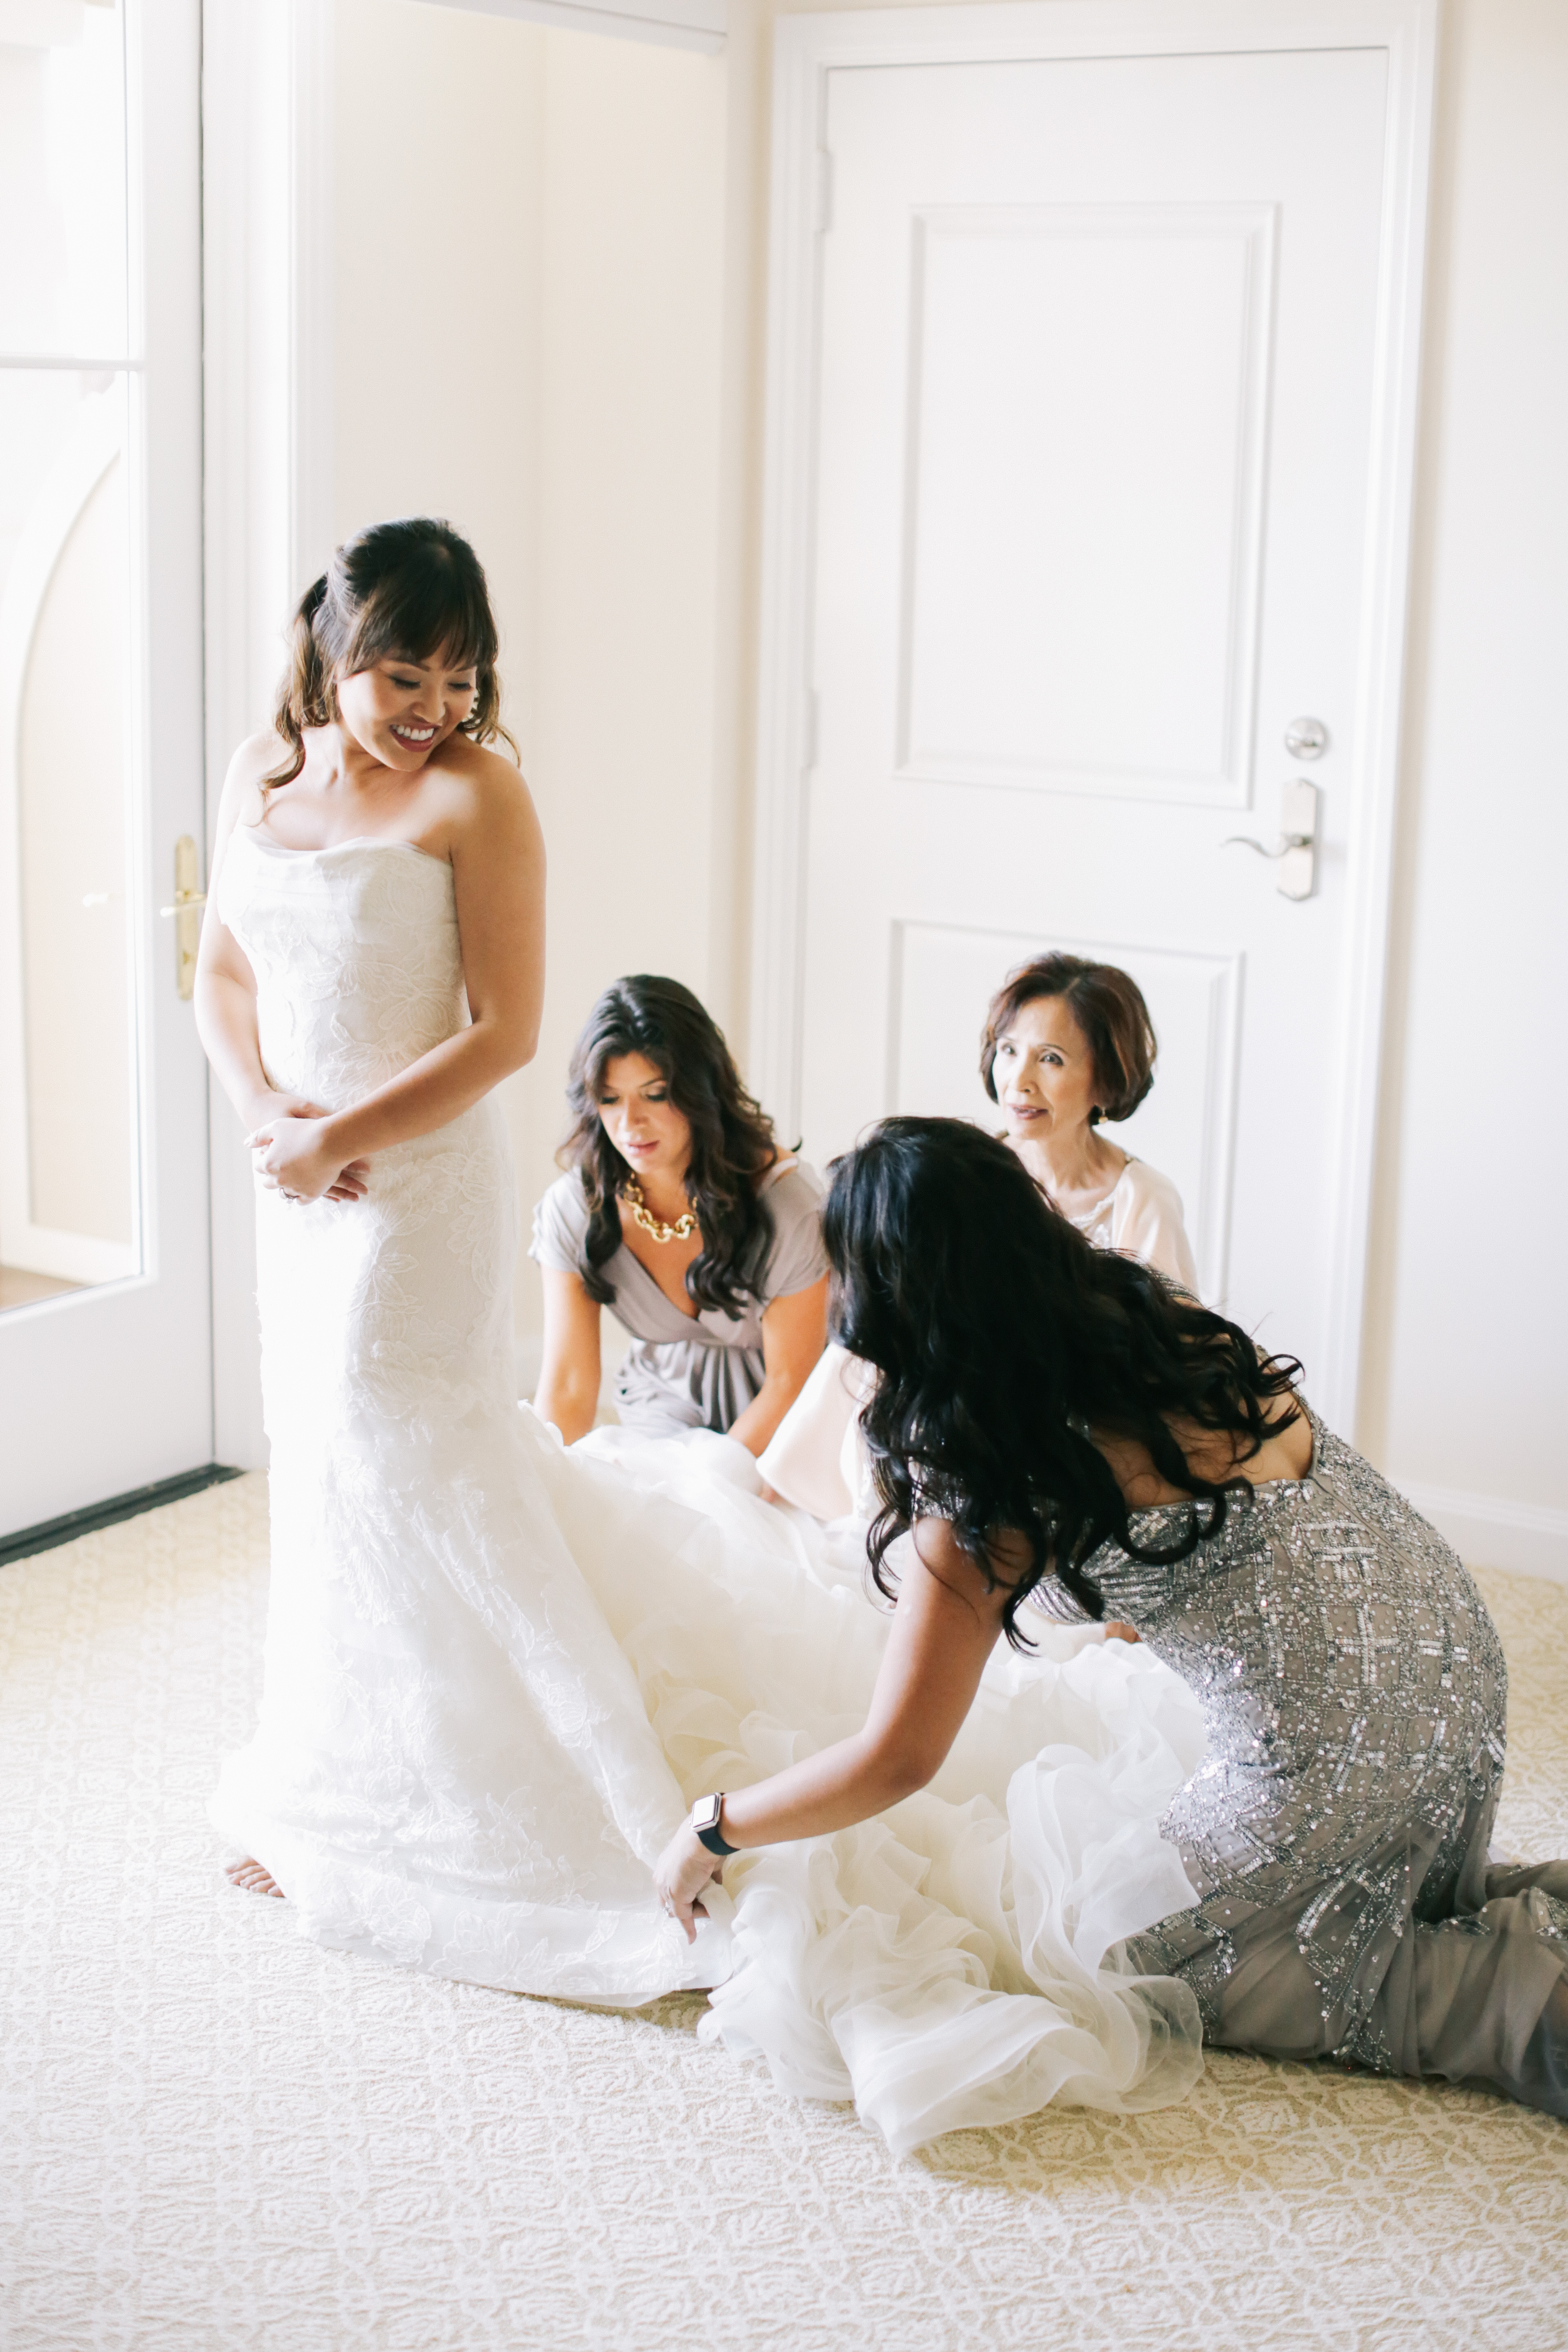 style me pretty mustard seed wedding inspiration feature